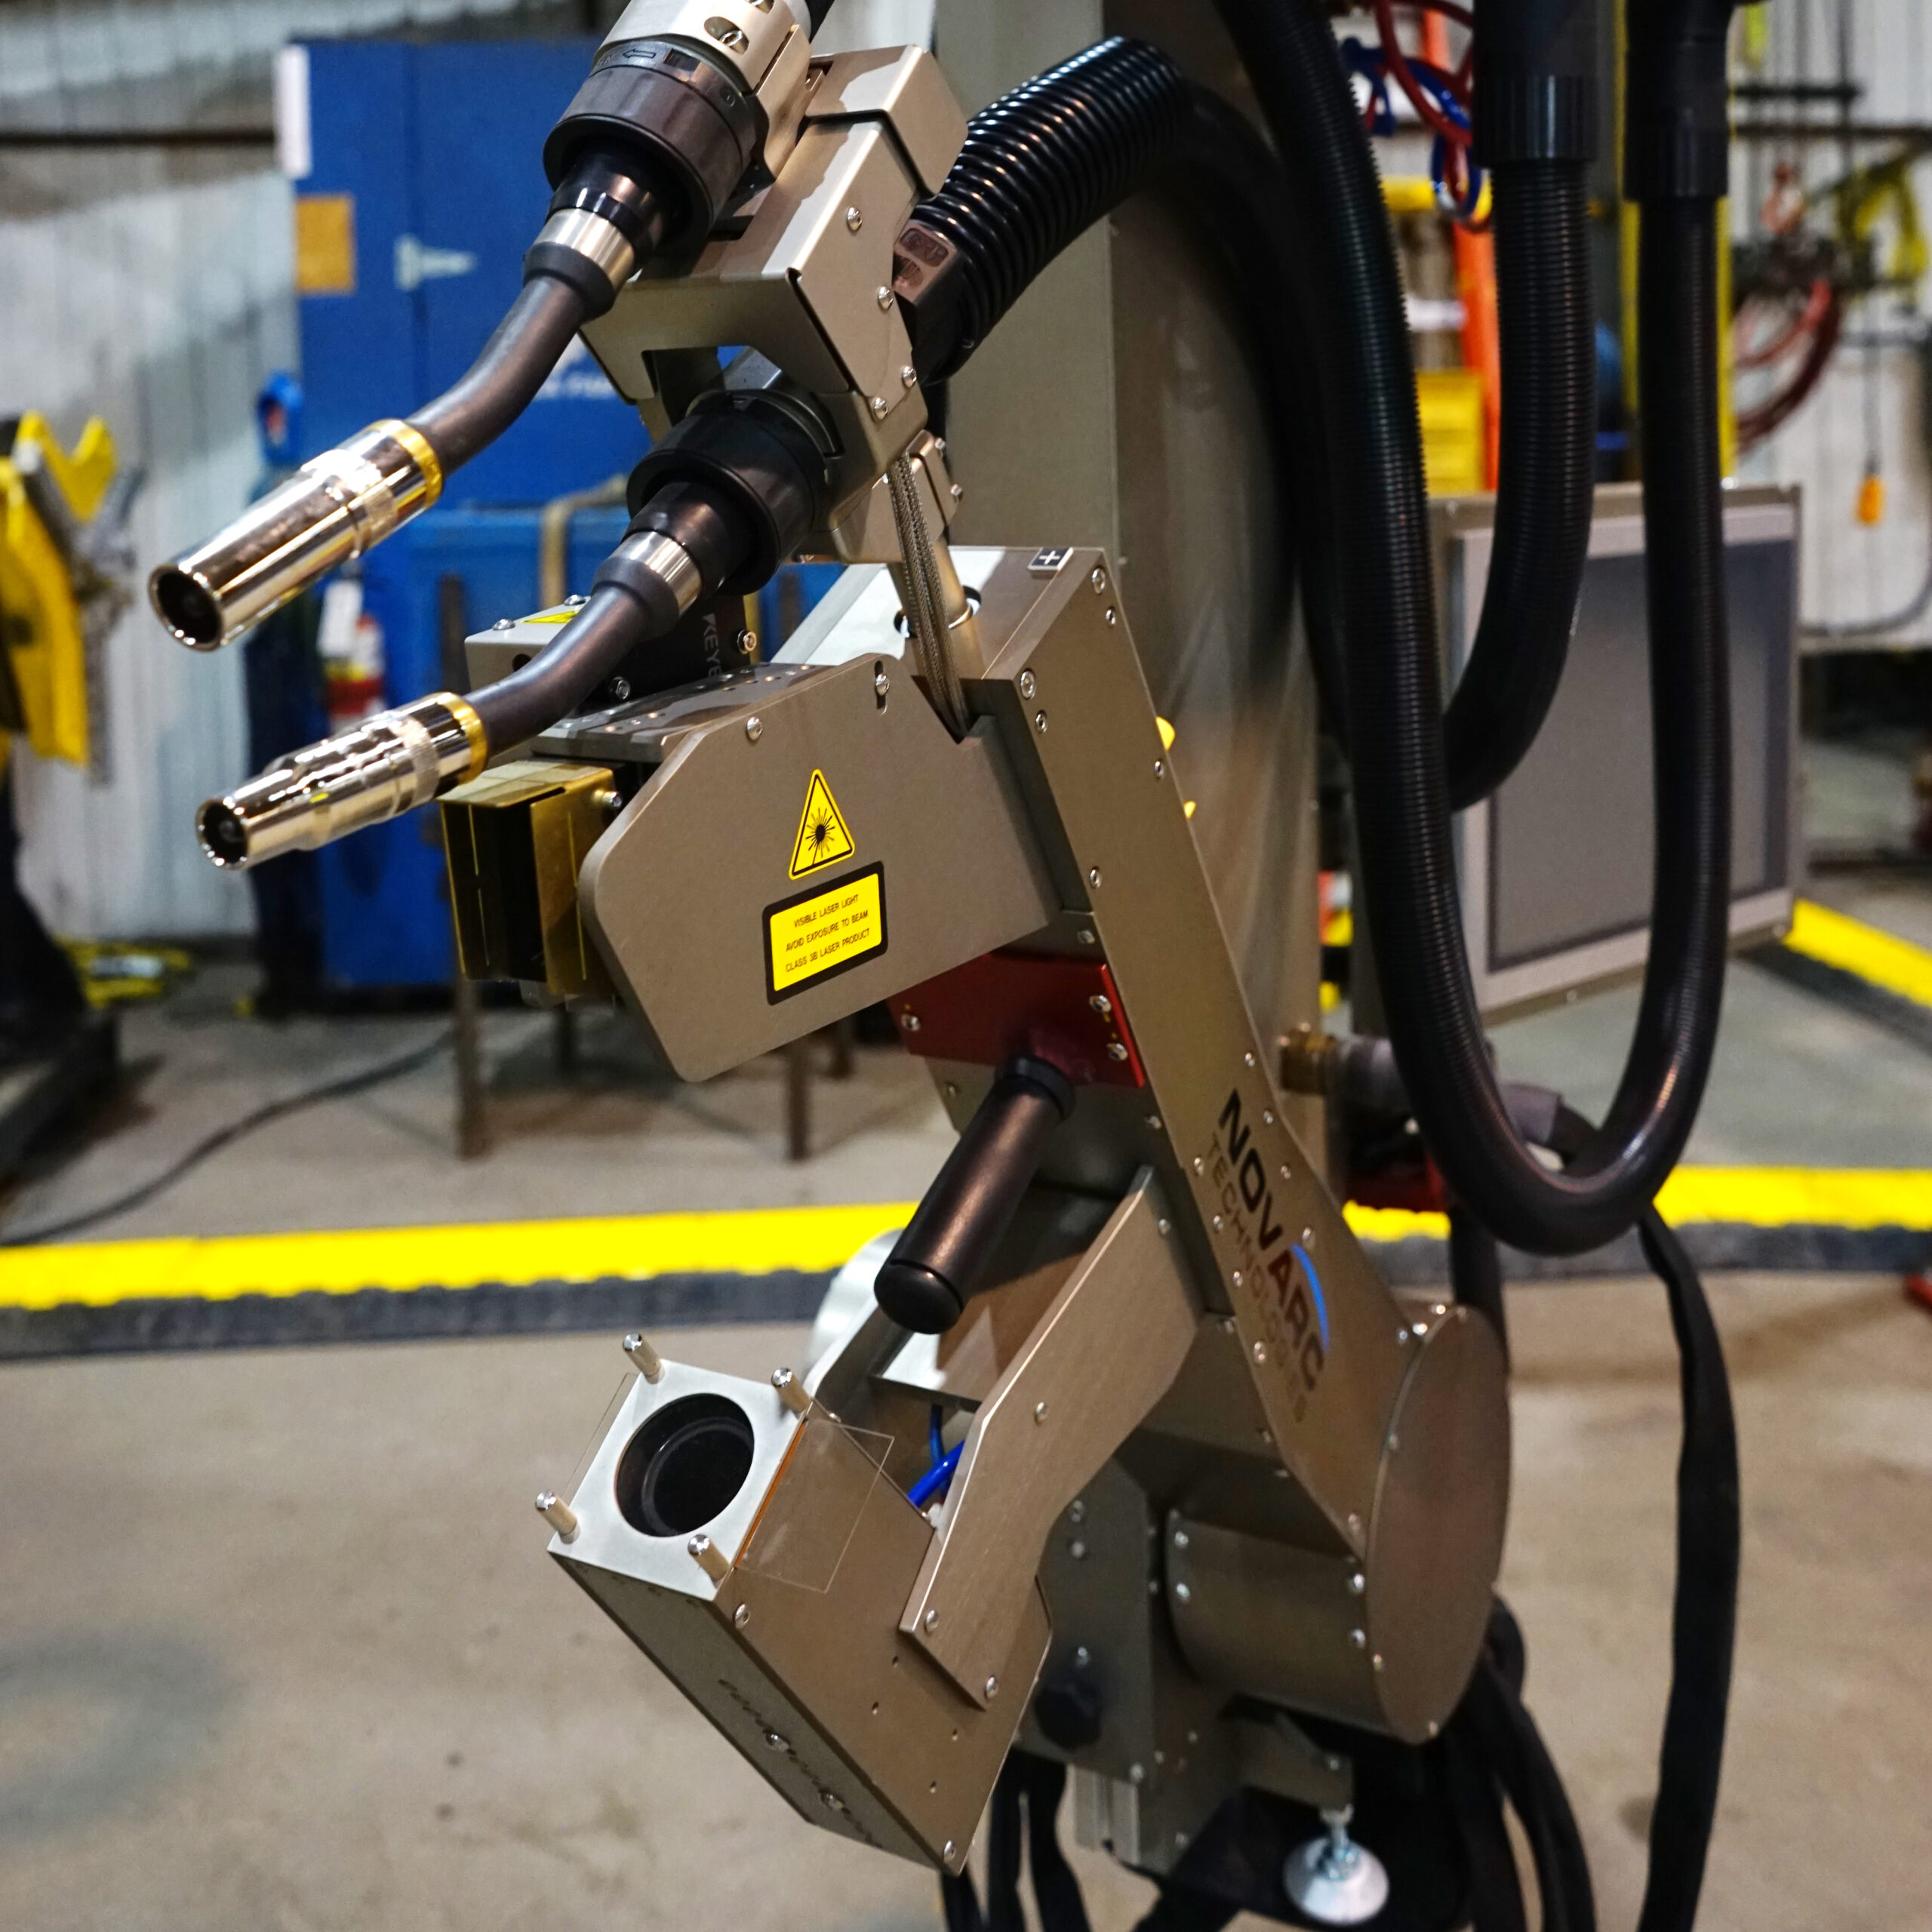 Welders’ Bodies & Overall Health Improve – Collaborative Spool Welding Robot a Positive Impact